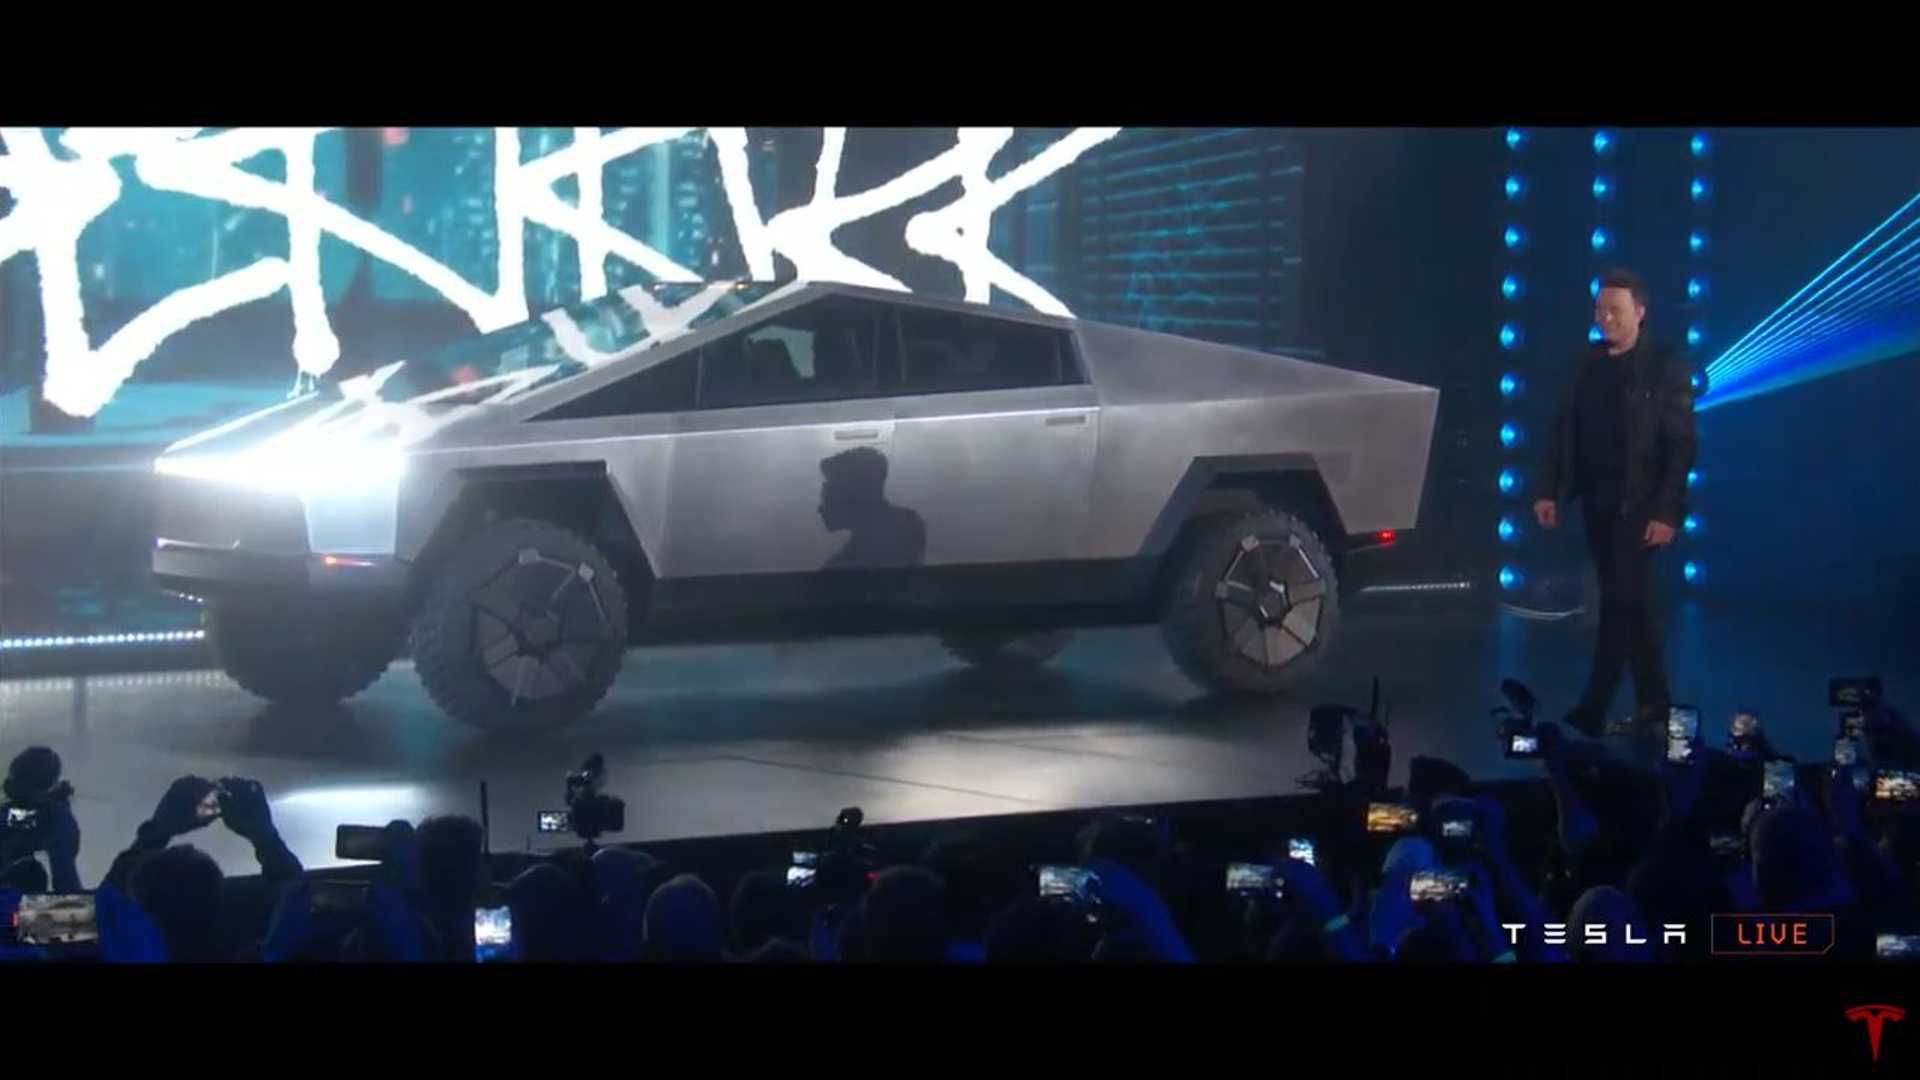 The new Tesla CyberTruck launched by Elon Musk in 2019